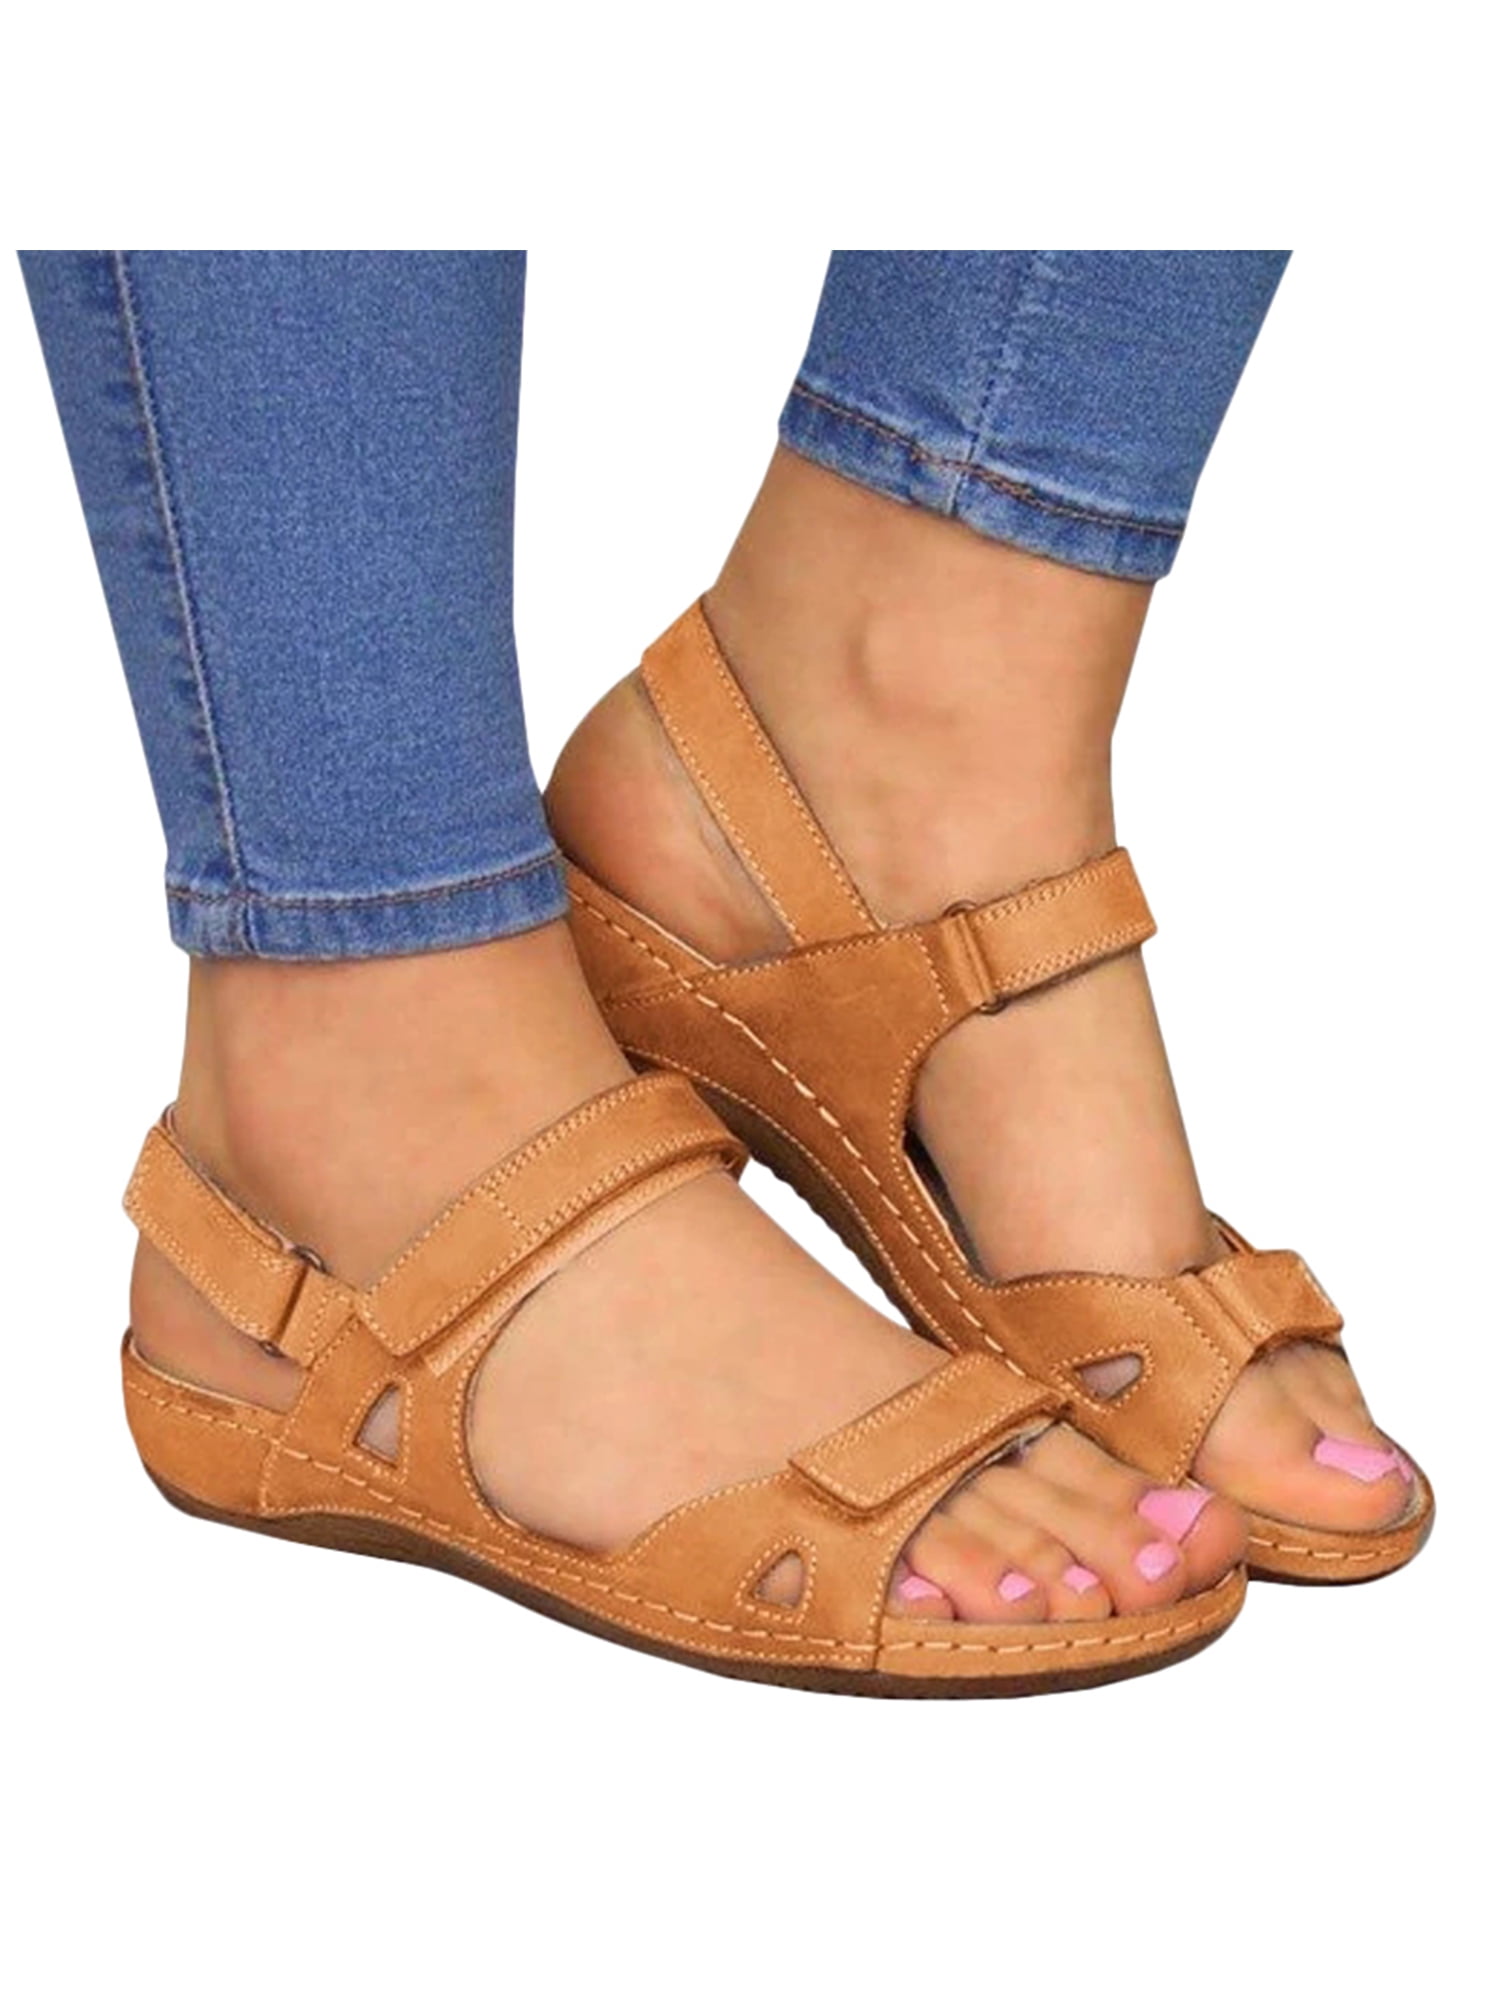 Womens Elastic Cross Strap Ankle Flat Sandals Casual Anti-Slip Open Toe Summer Beach Sandals Shoes Size 5-8